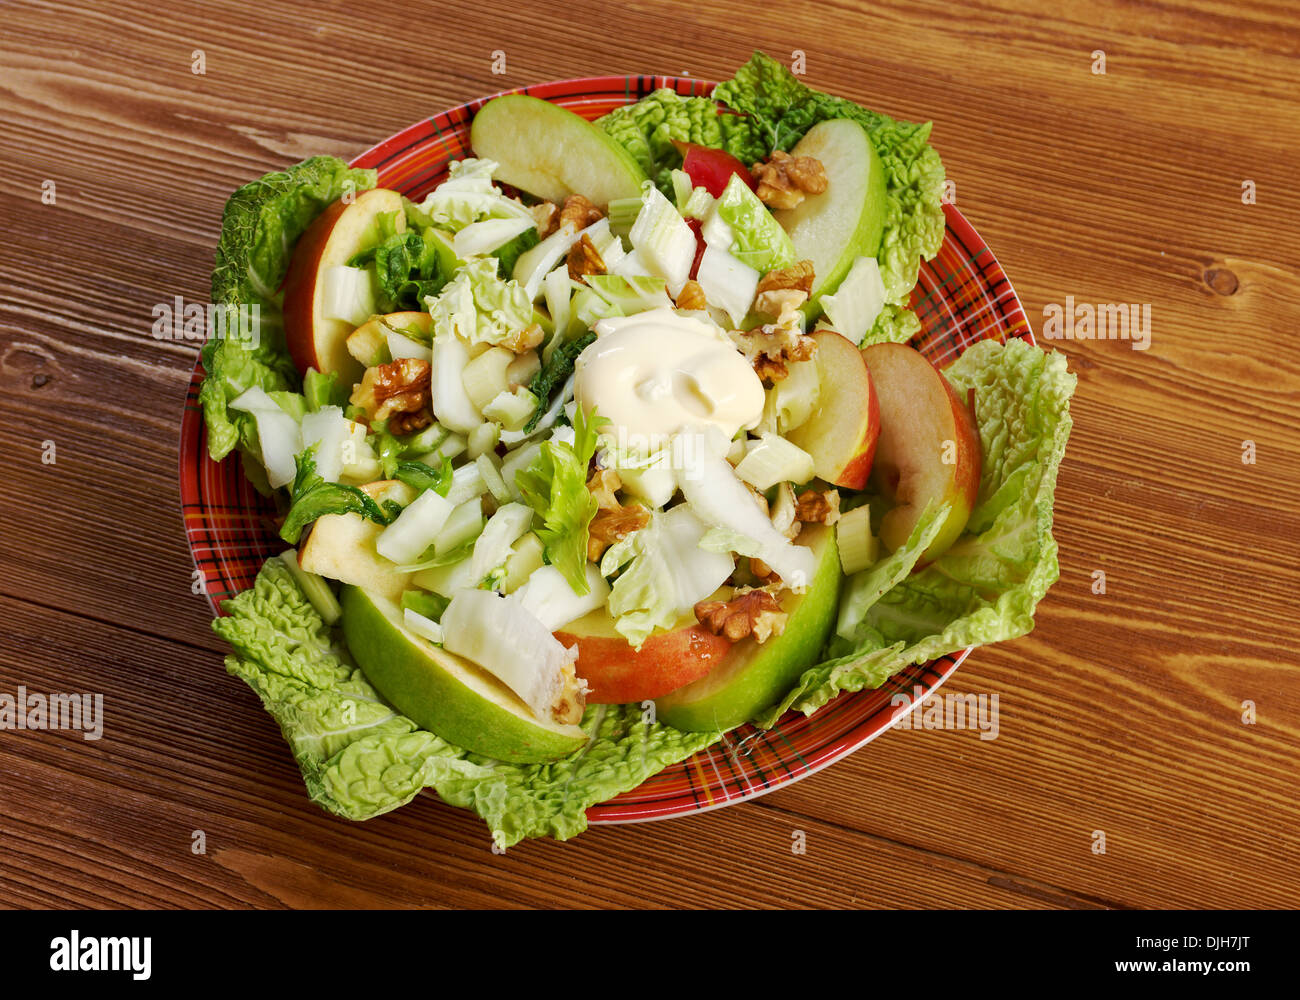 Waldorf salad made of fresh apples, celery and walnuts.farm-style Stock Photo